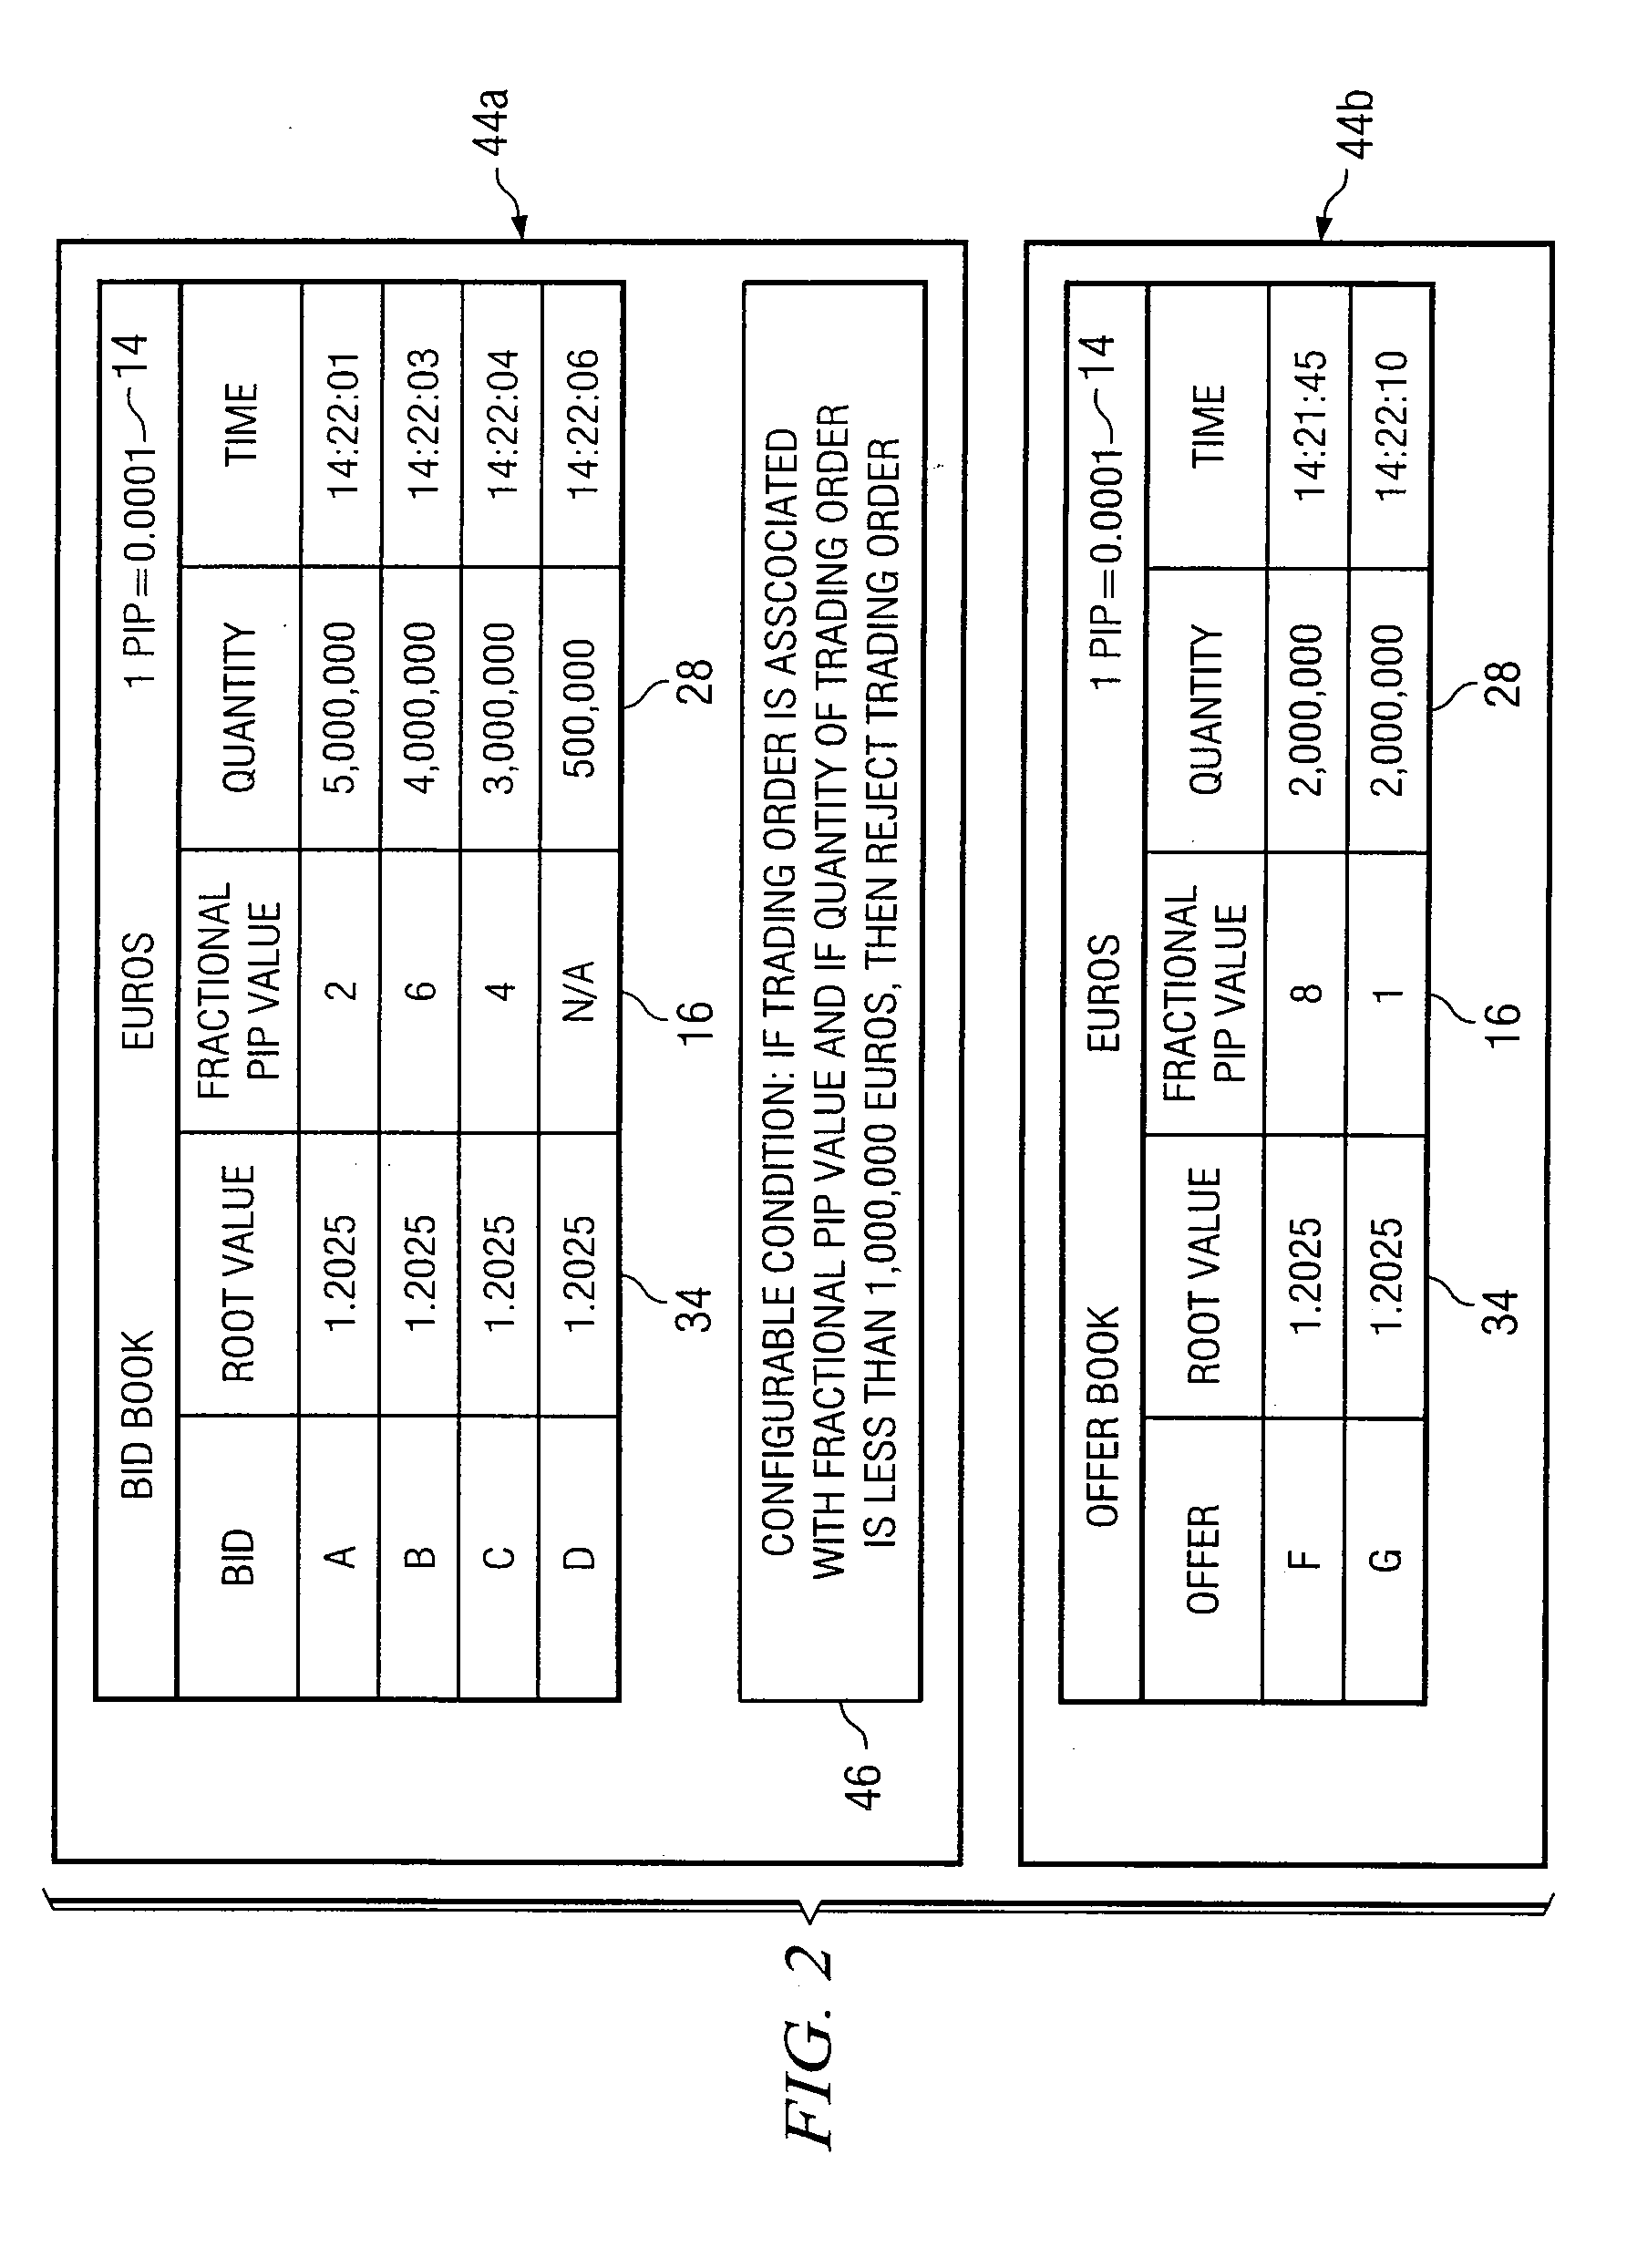 System and Method for Managing Trading Orders in Aggregated Order Books